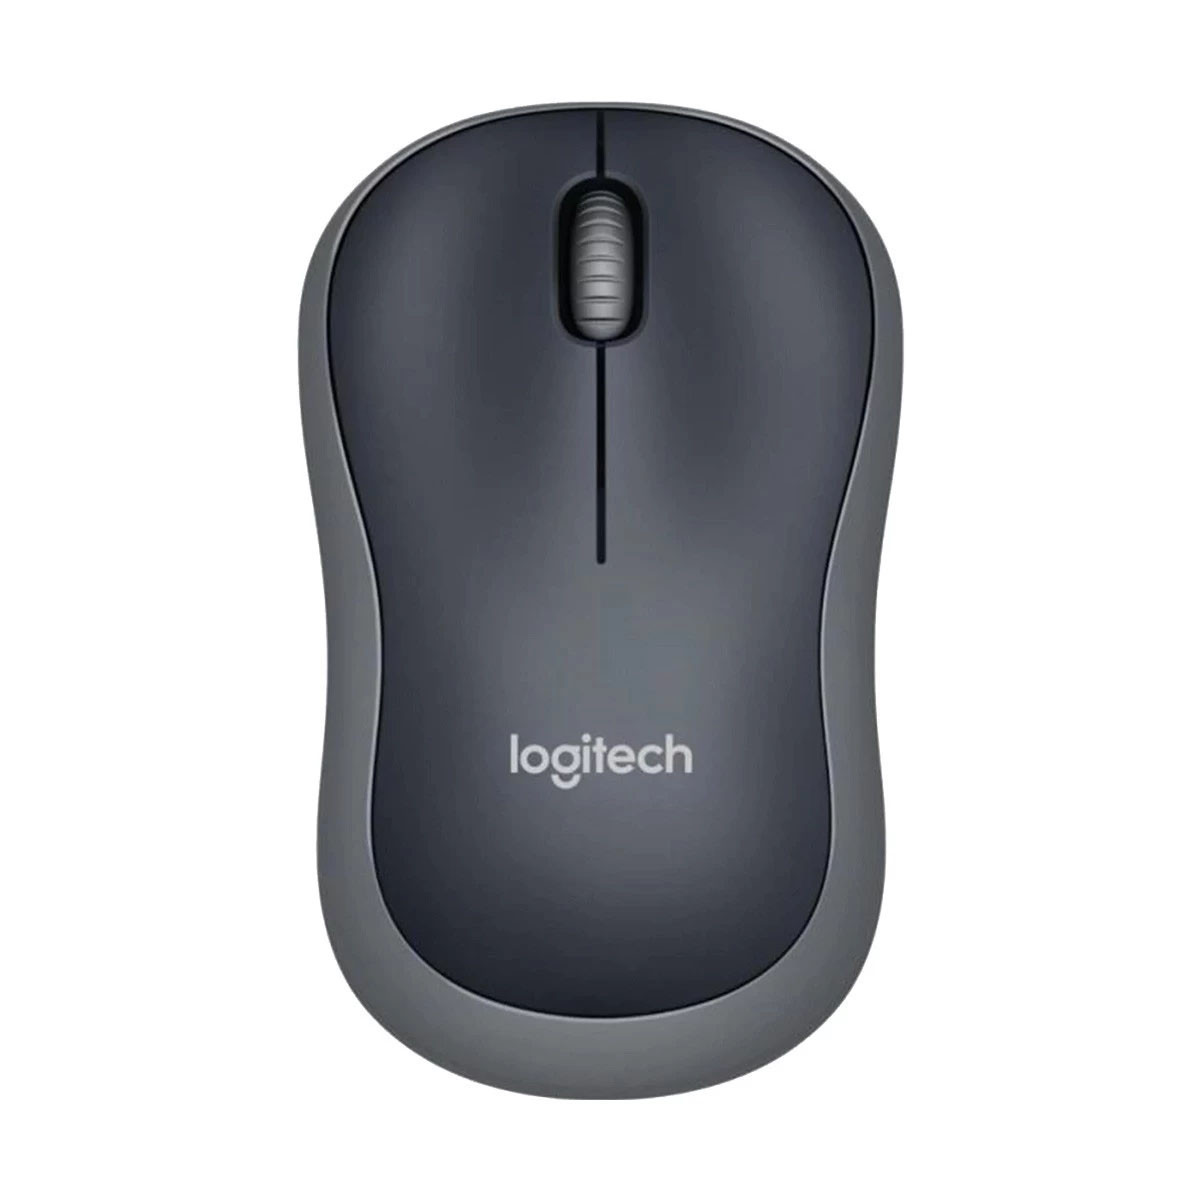 Logitech M185 Wireless Mouse, 2.4GHz with USB Mini Receiver, 12-Month Battery Life, 1000 DPI Optical Tracking, Ambidextrous PC / Mac / Laptop